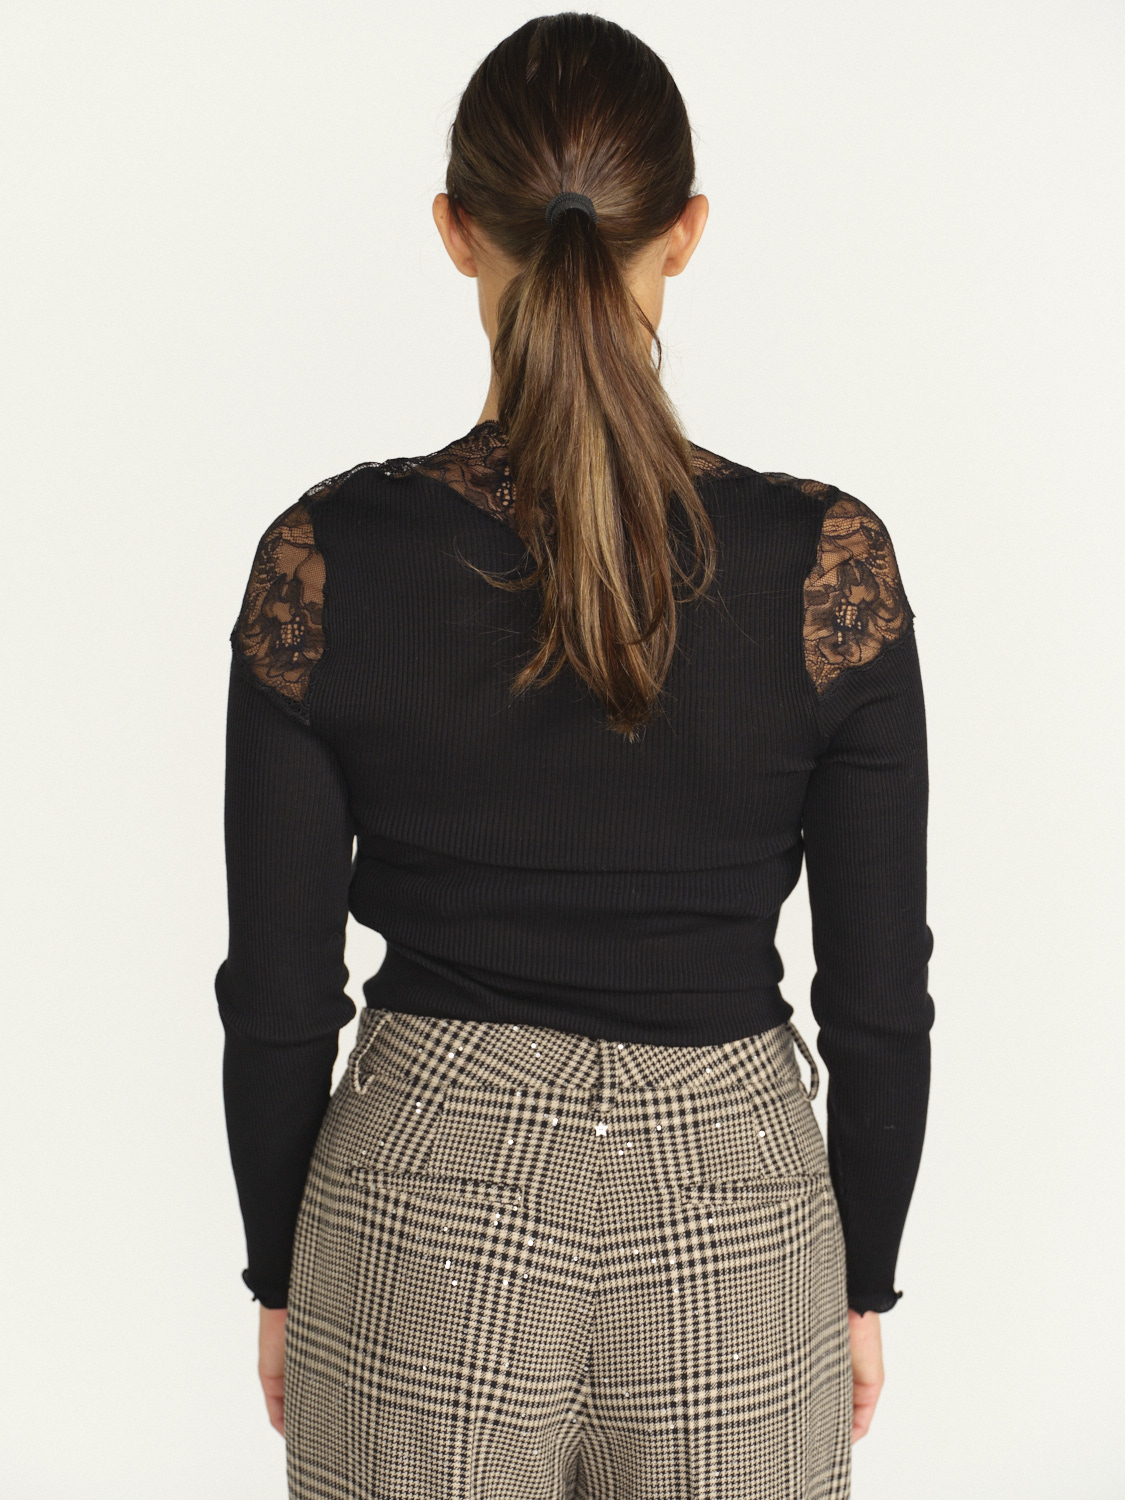 Oscalito Balza - long sleeve top with lace details  black M